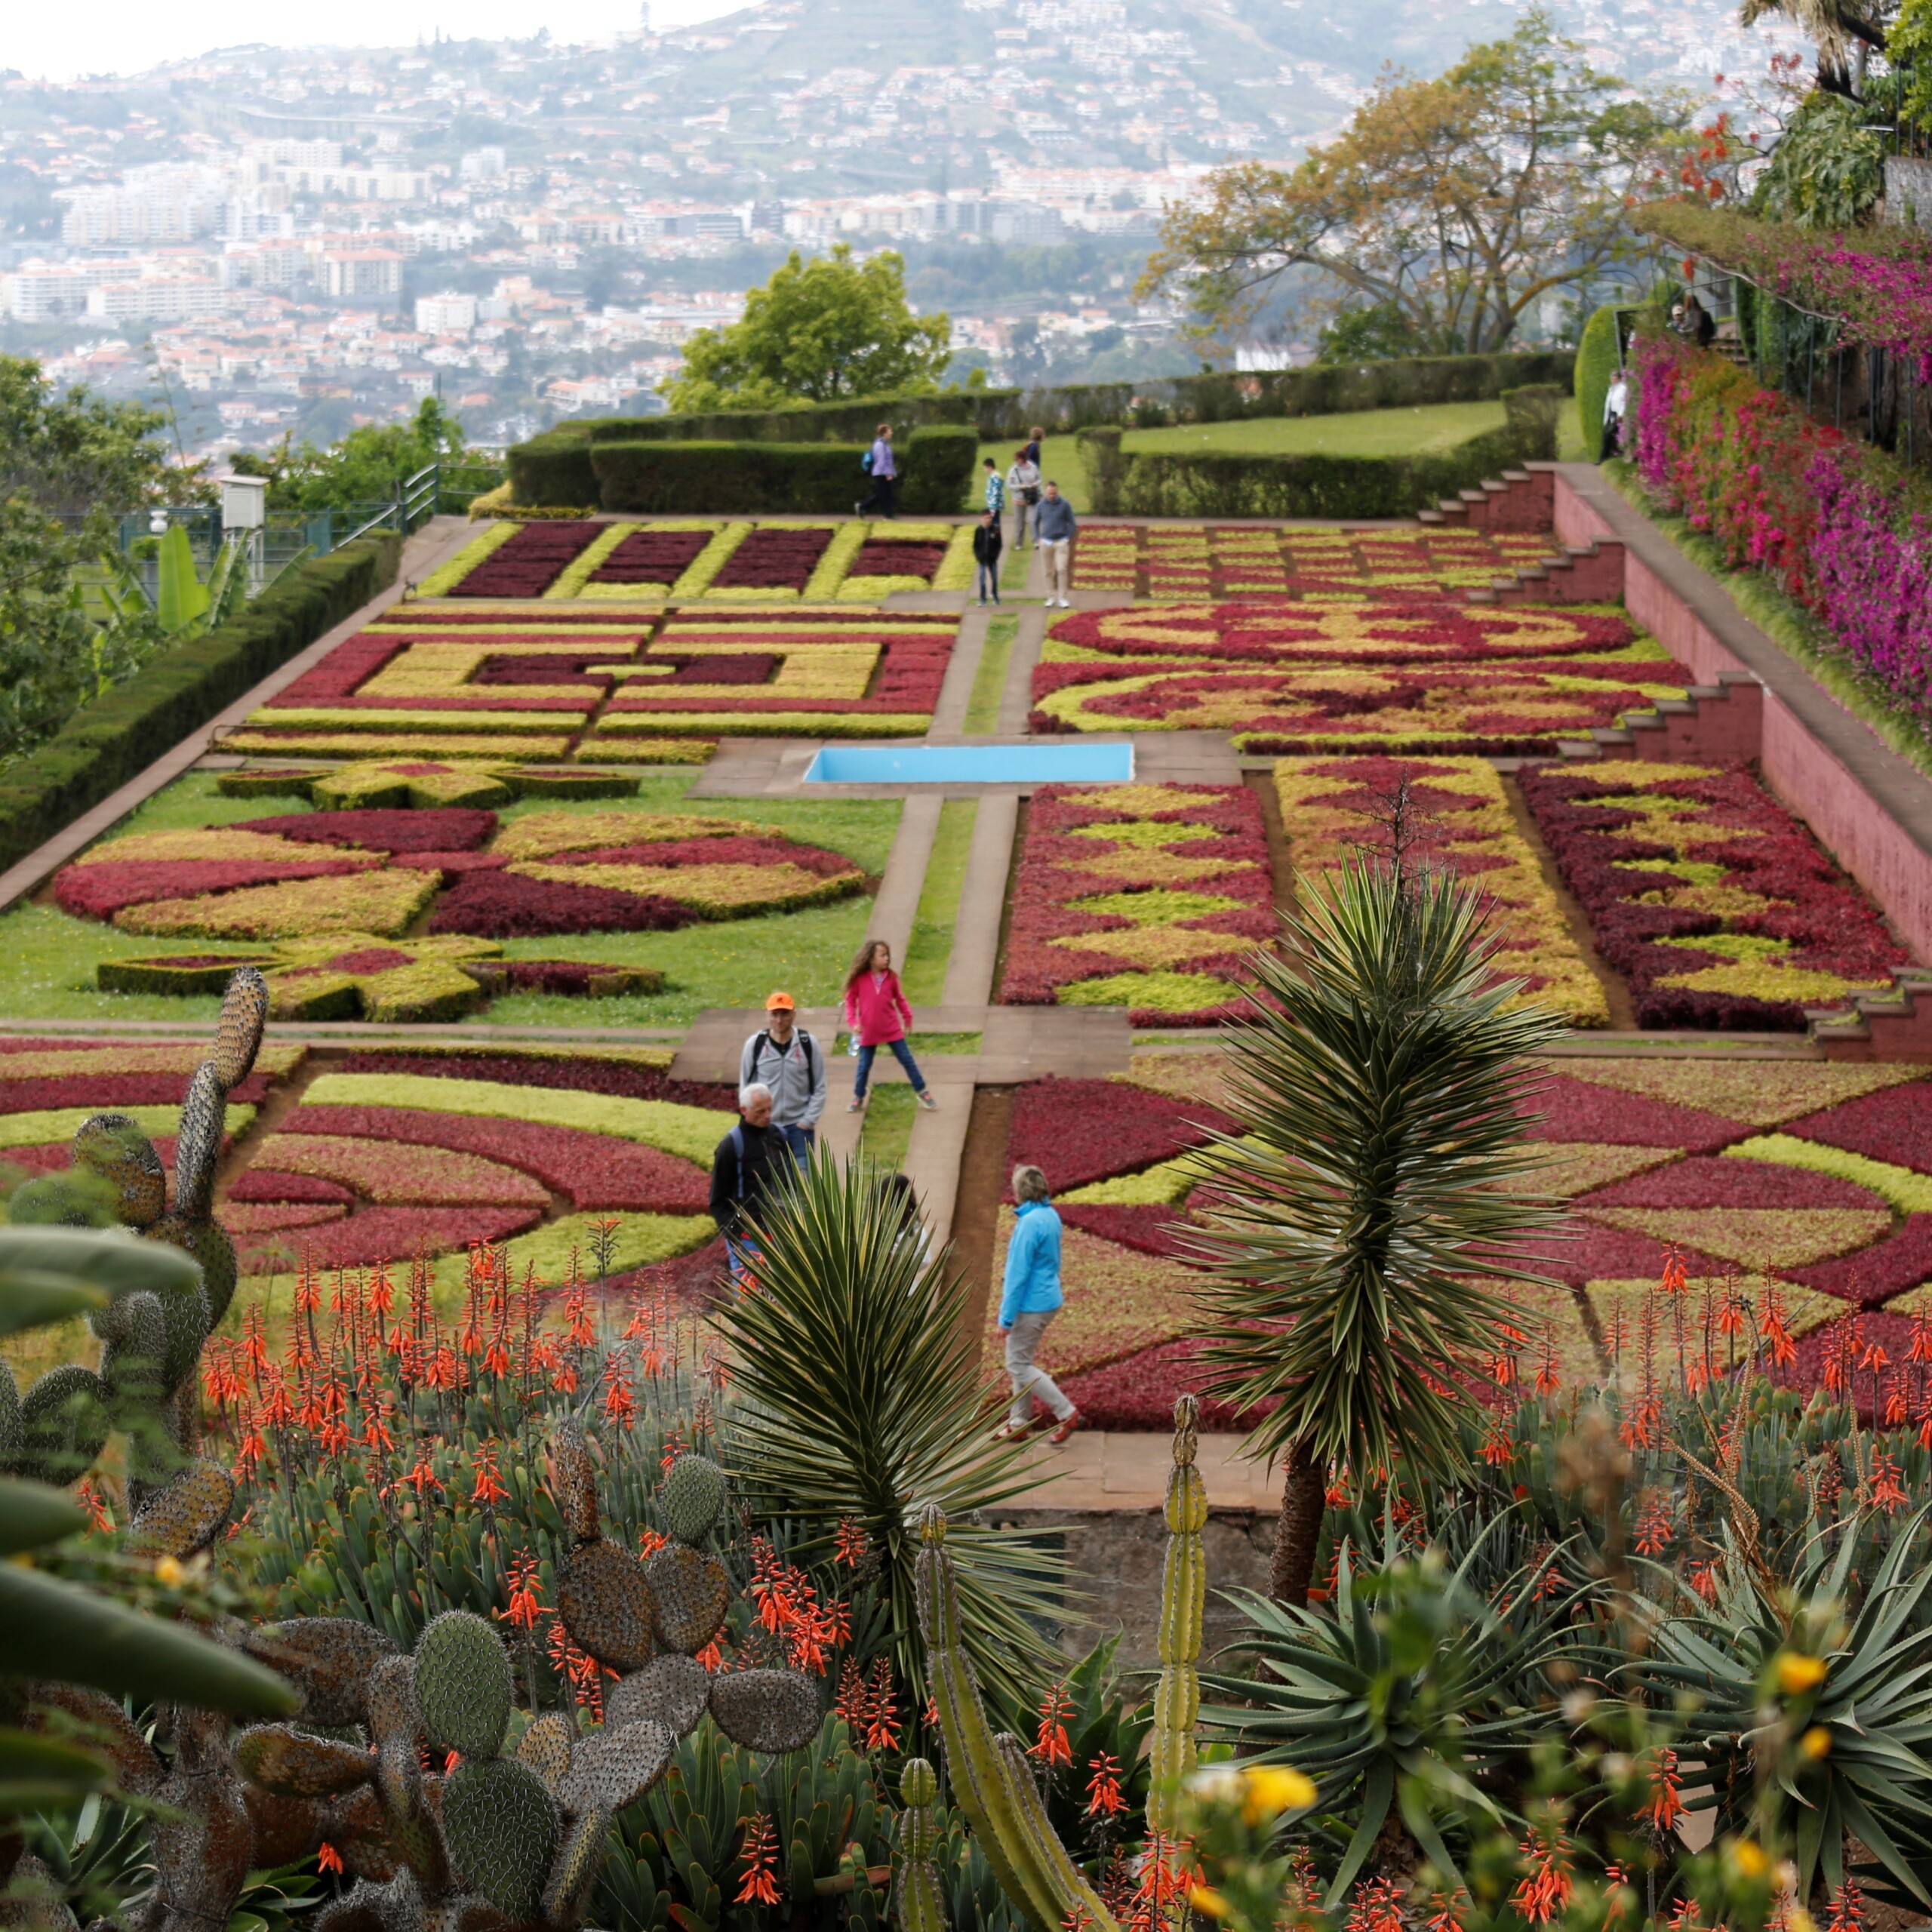 A Guide to Exploring Funchal's Botanical Garden: How to Get There and Make the Most of Your Visit